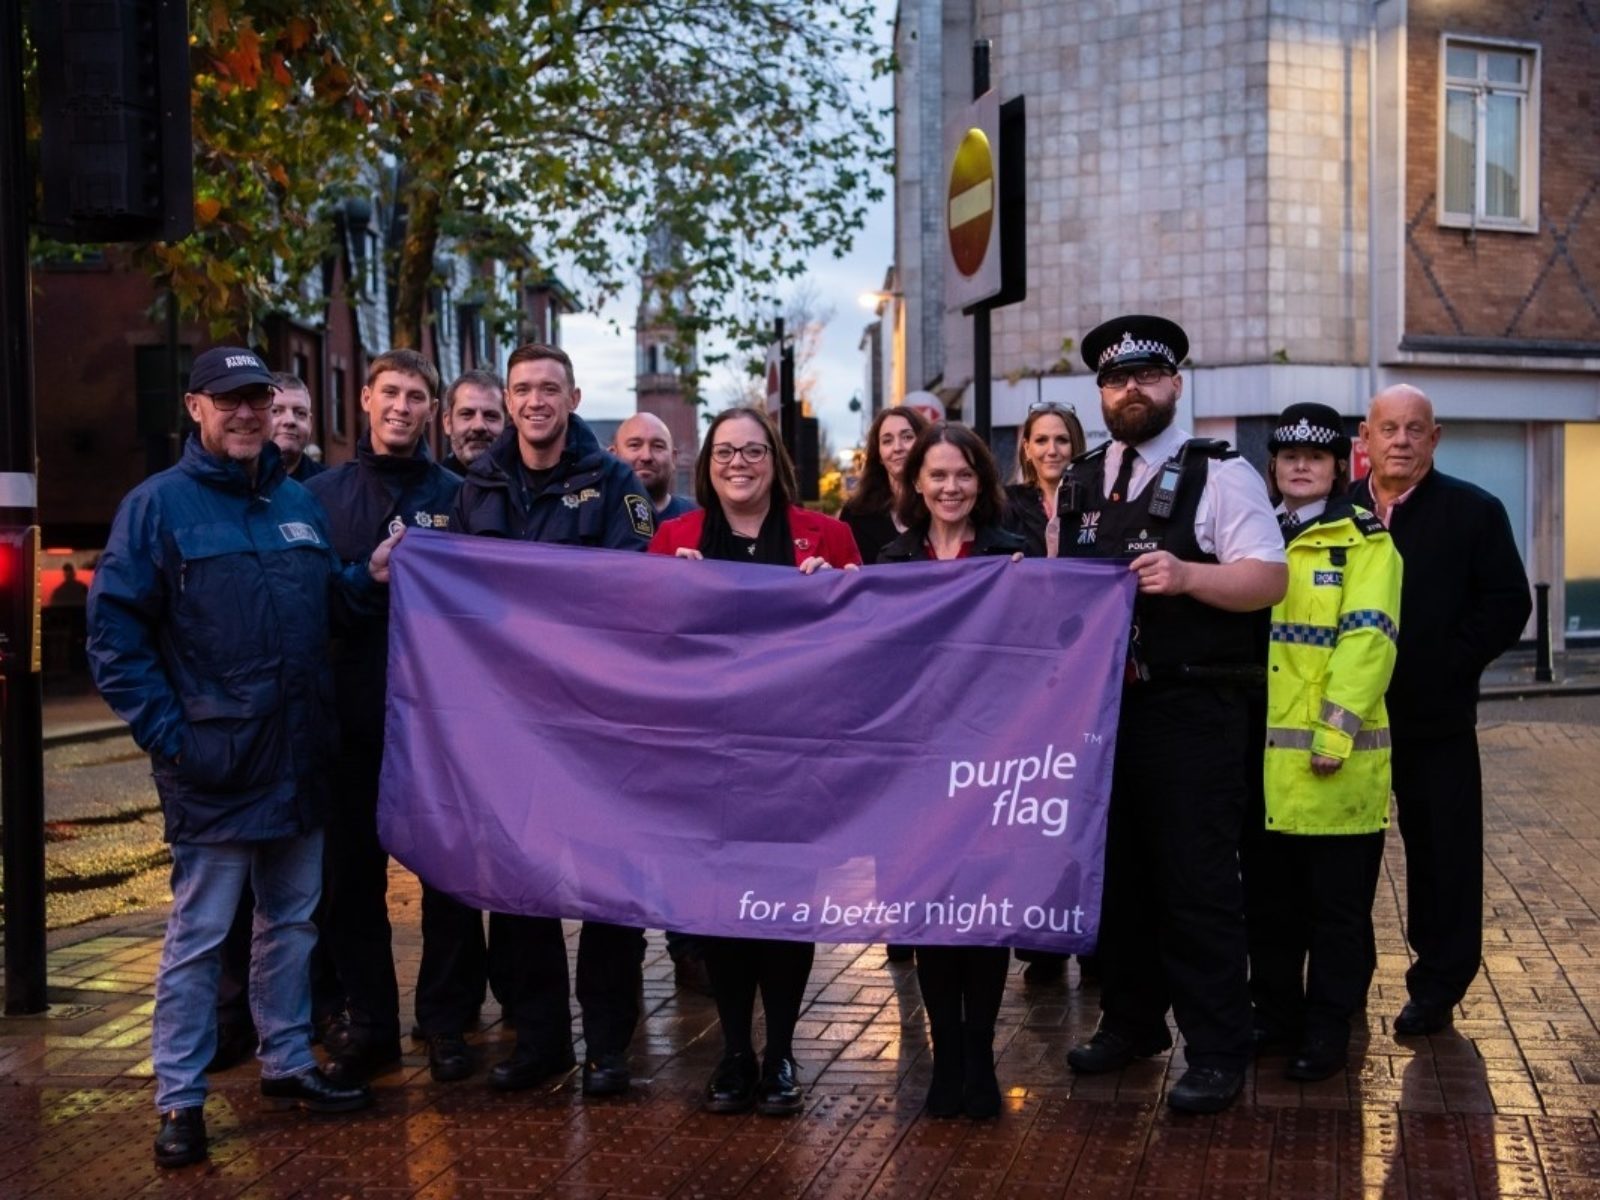 Cllr Jeanie Bell, Merseyside Police and other agencies celebrating the Purple Flag award